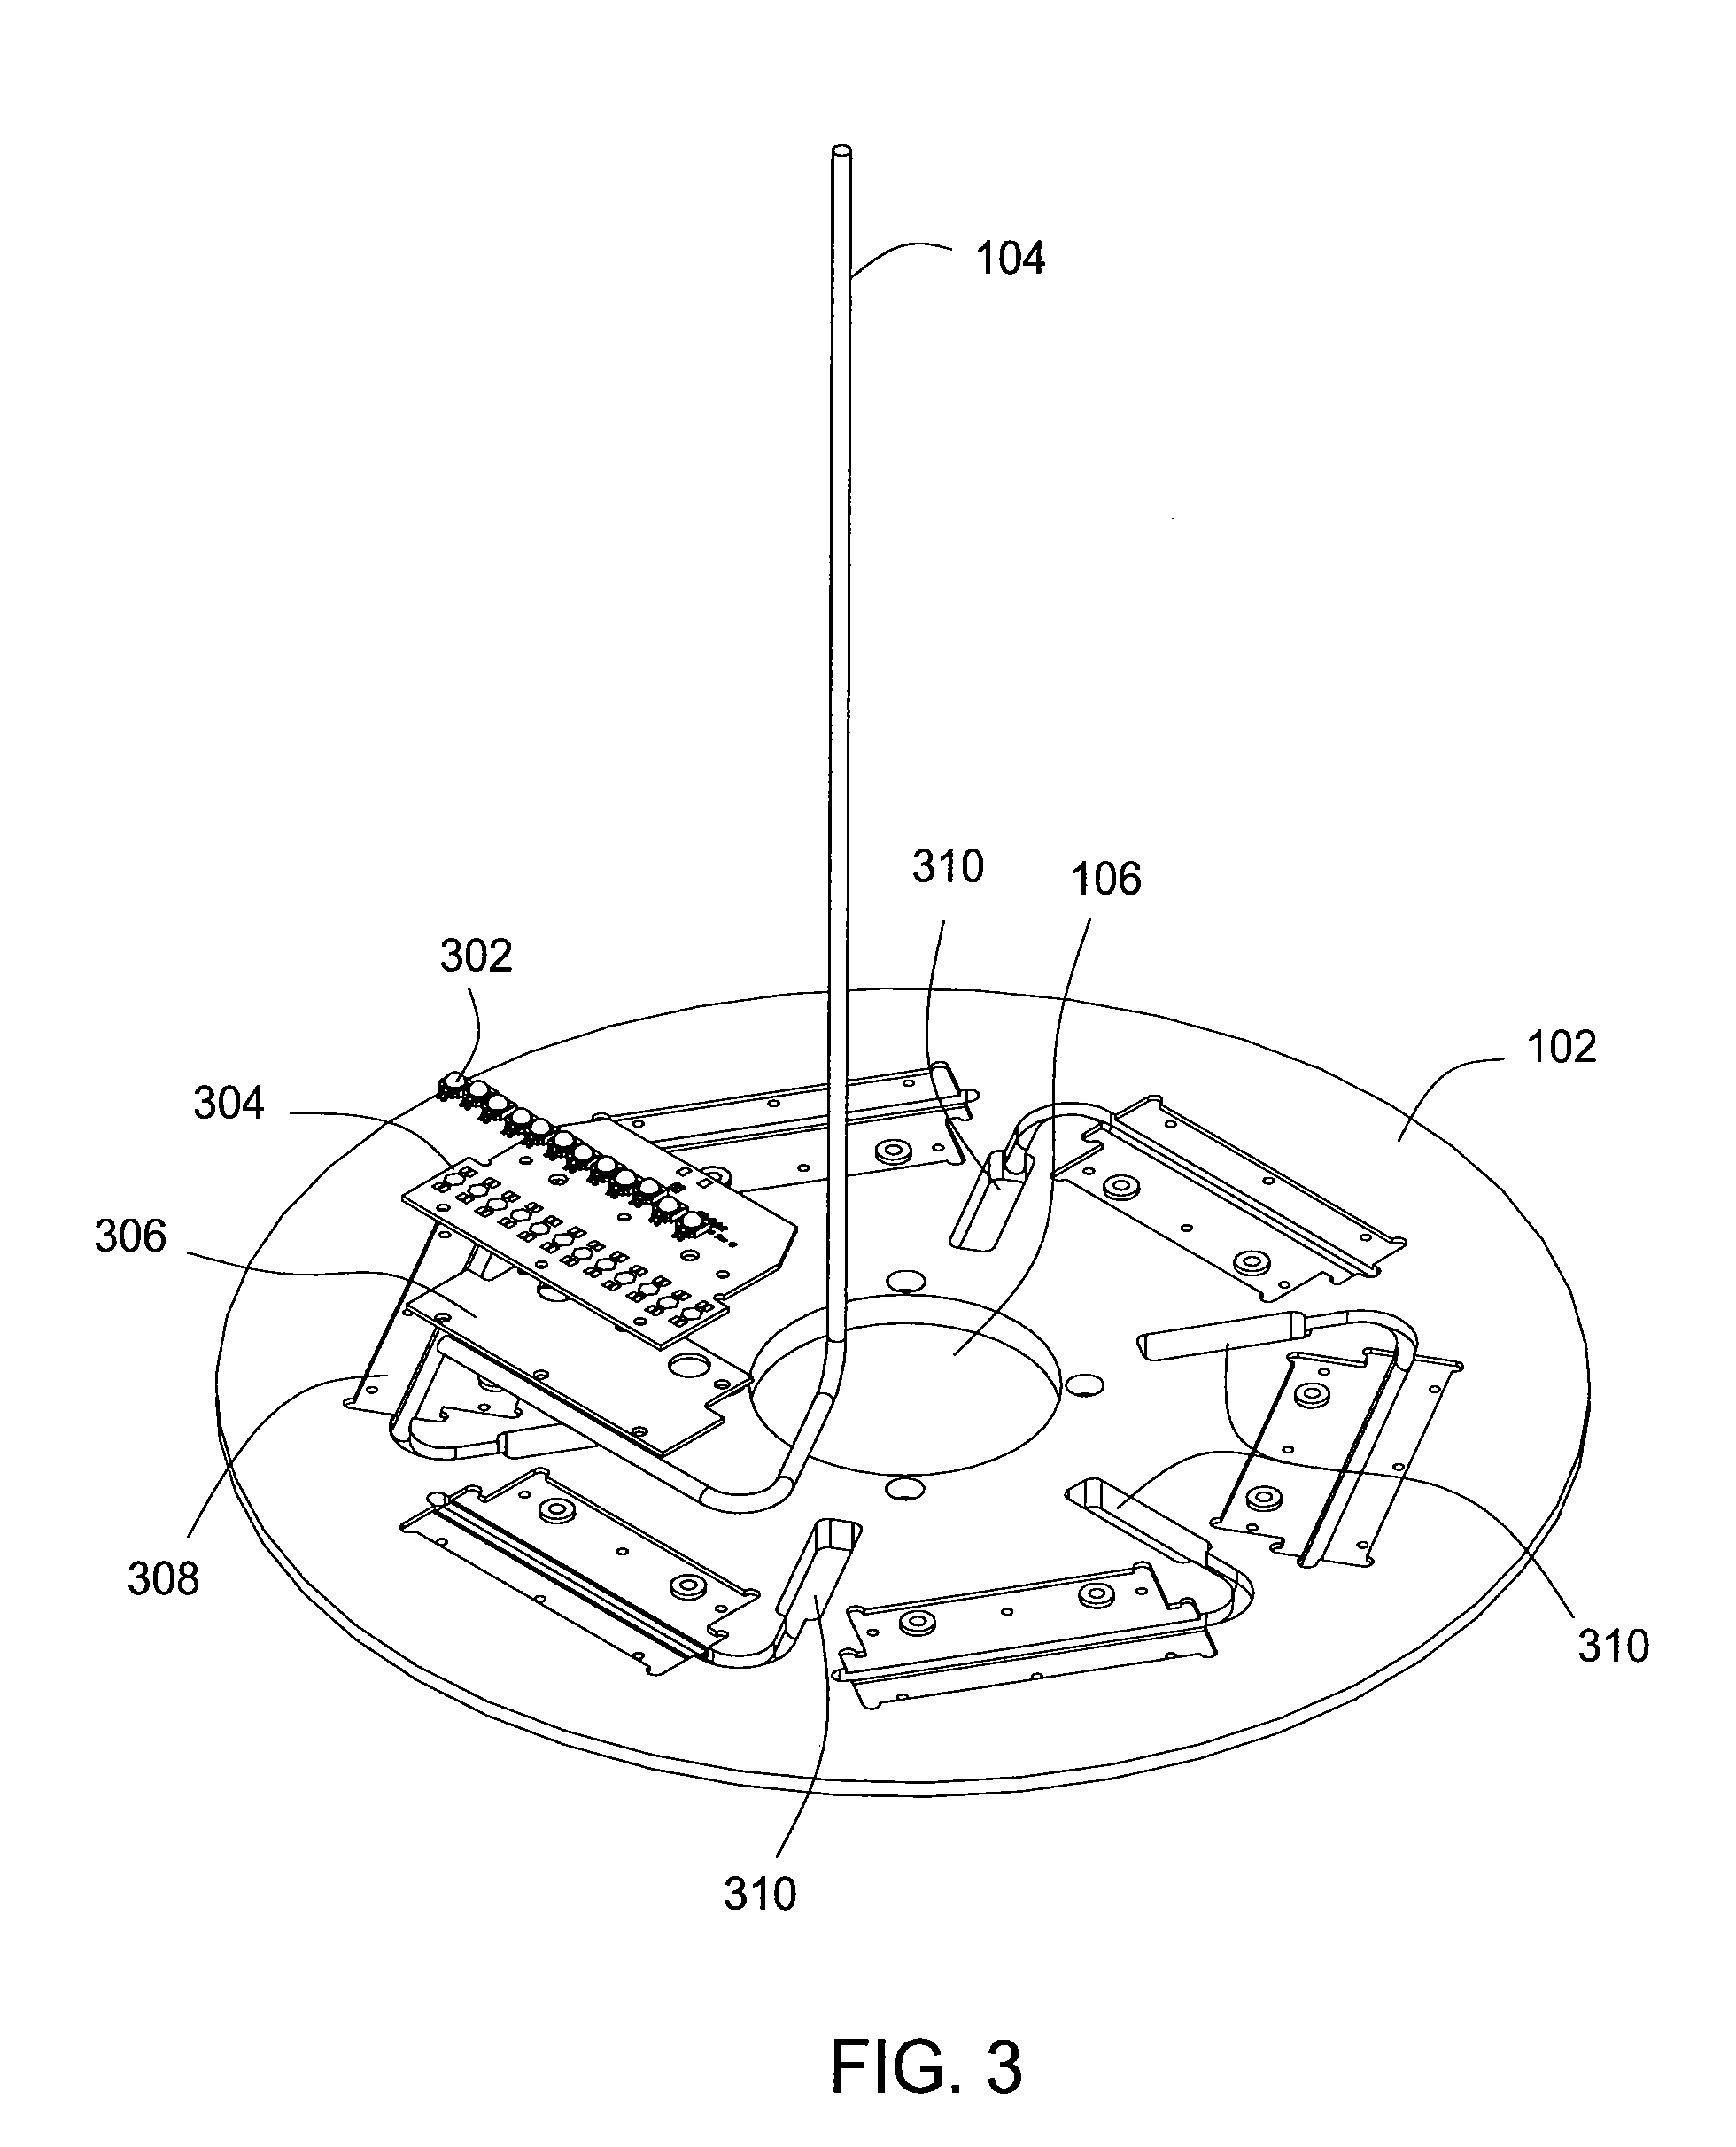 Apparatus for using heat pipes in controlling temperature of an LED light unit